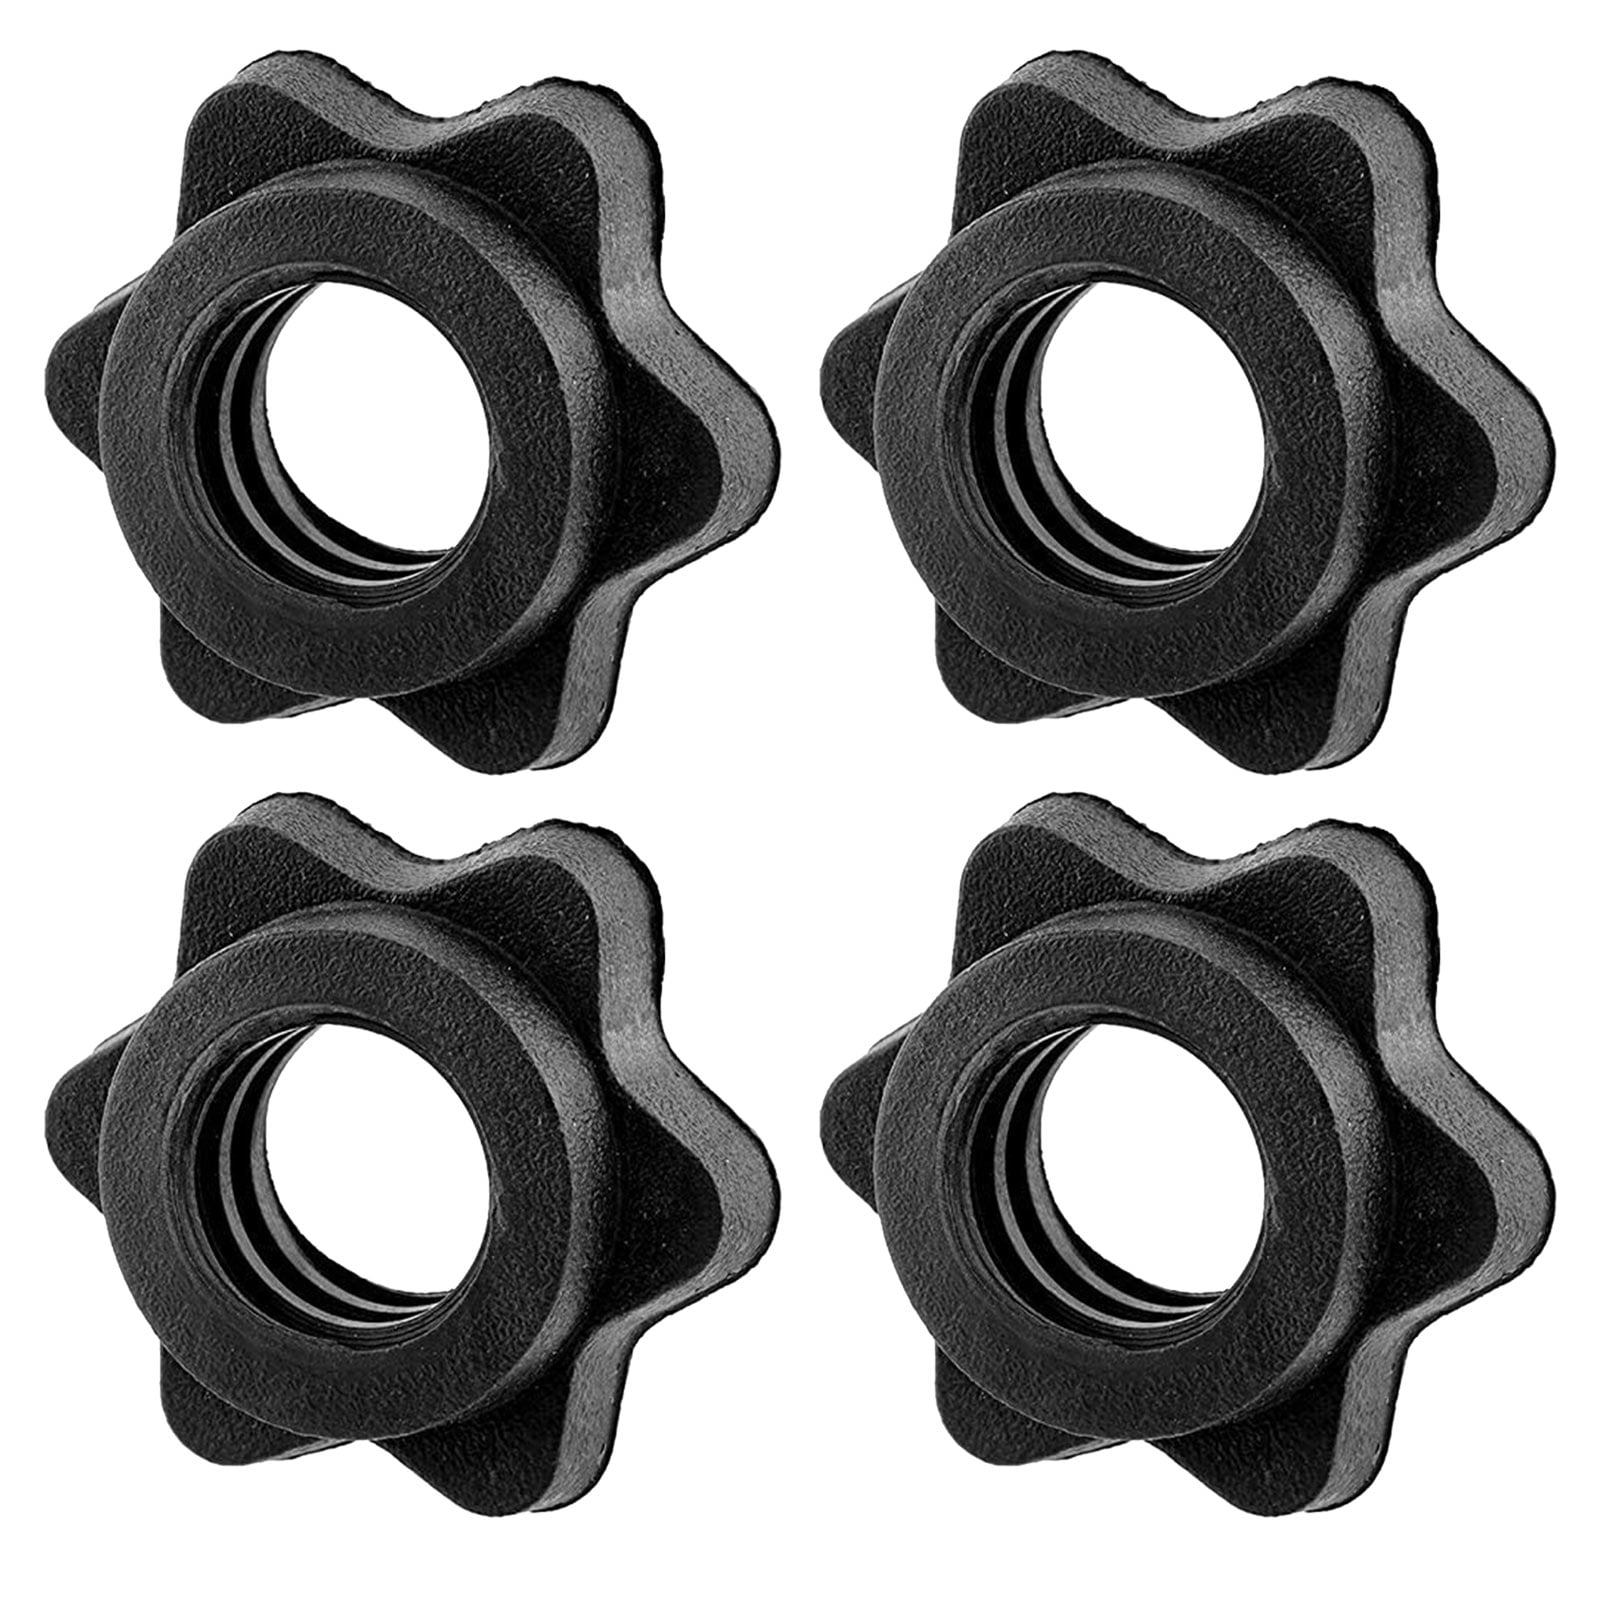 4x Standard 1'' Dumbbell Lock Replacement Barbell Hex Nut Bars Collar Screw 